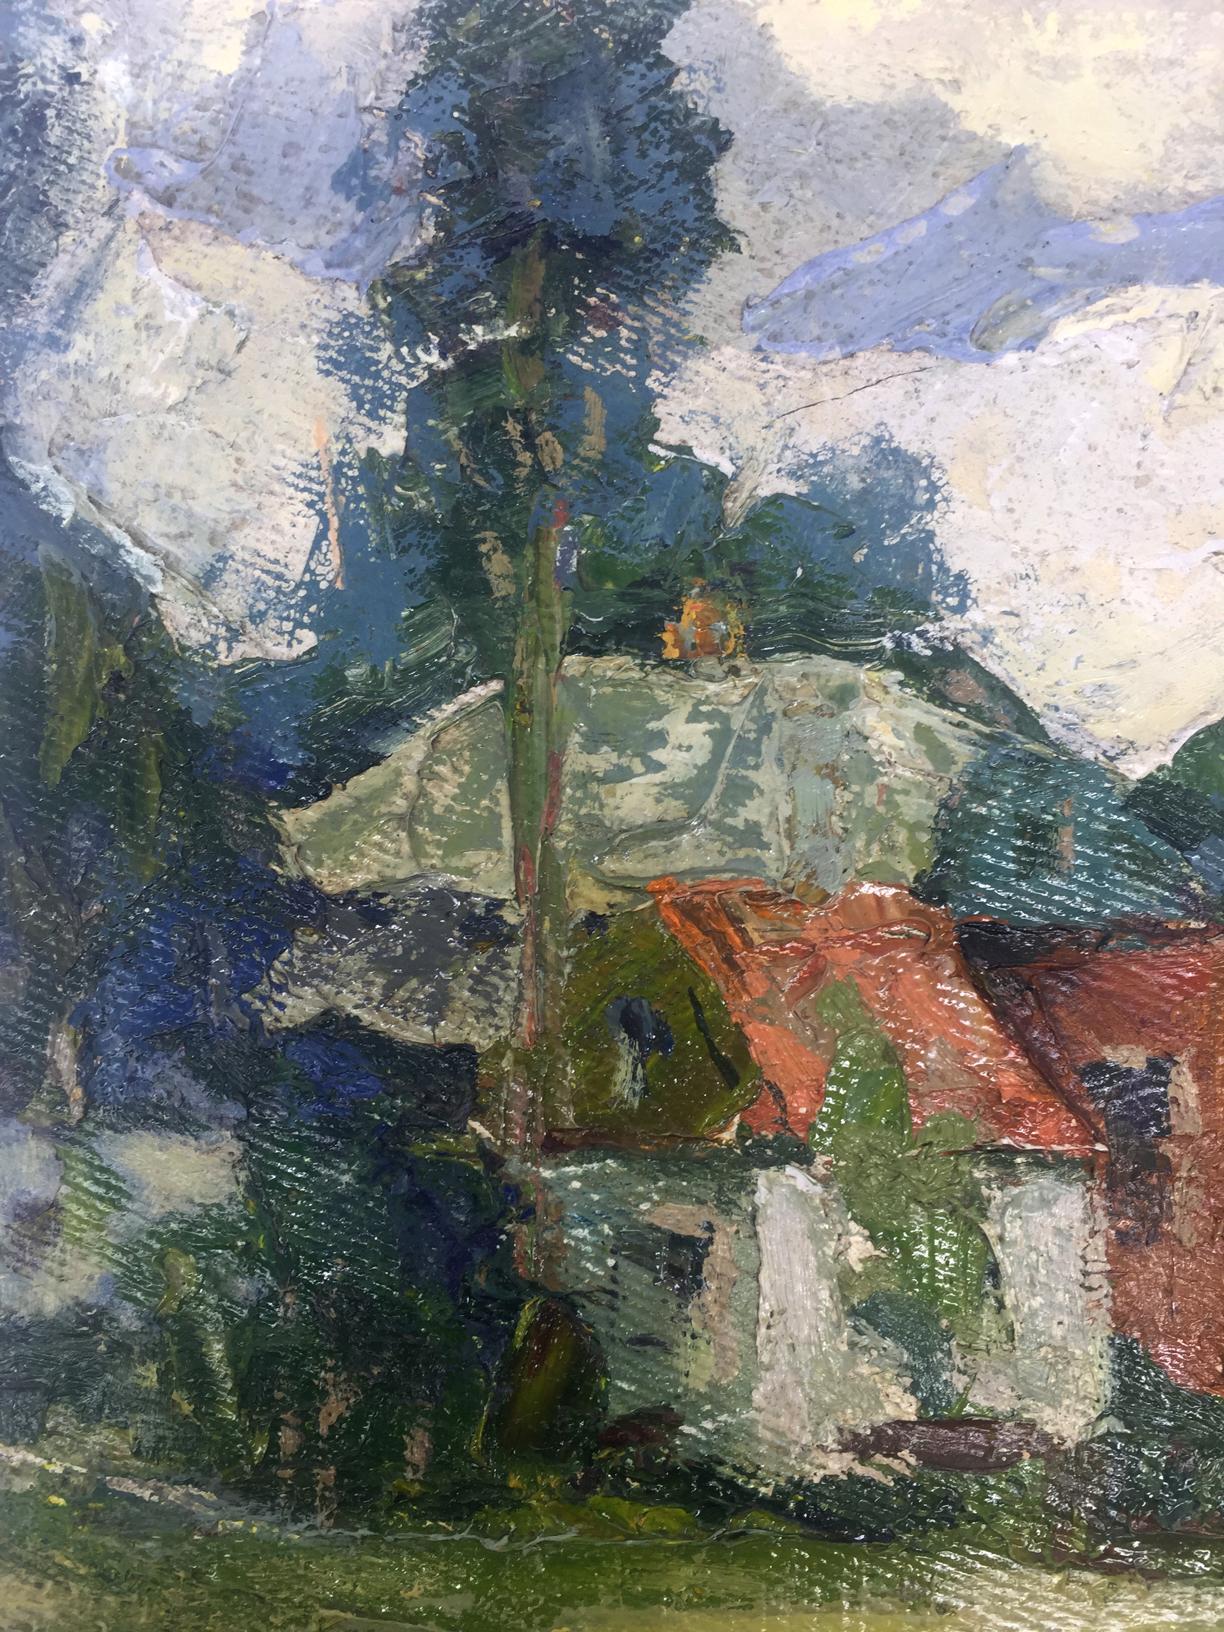 The oil painting depicts homes on the outskirts